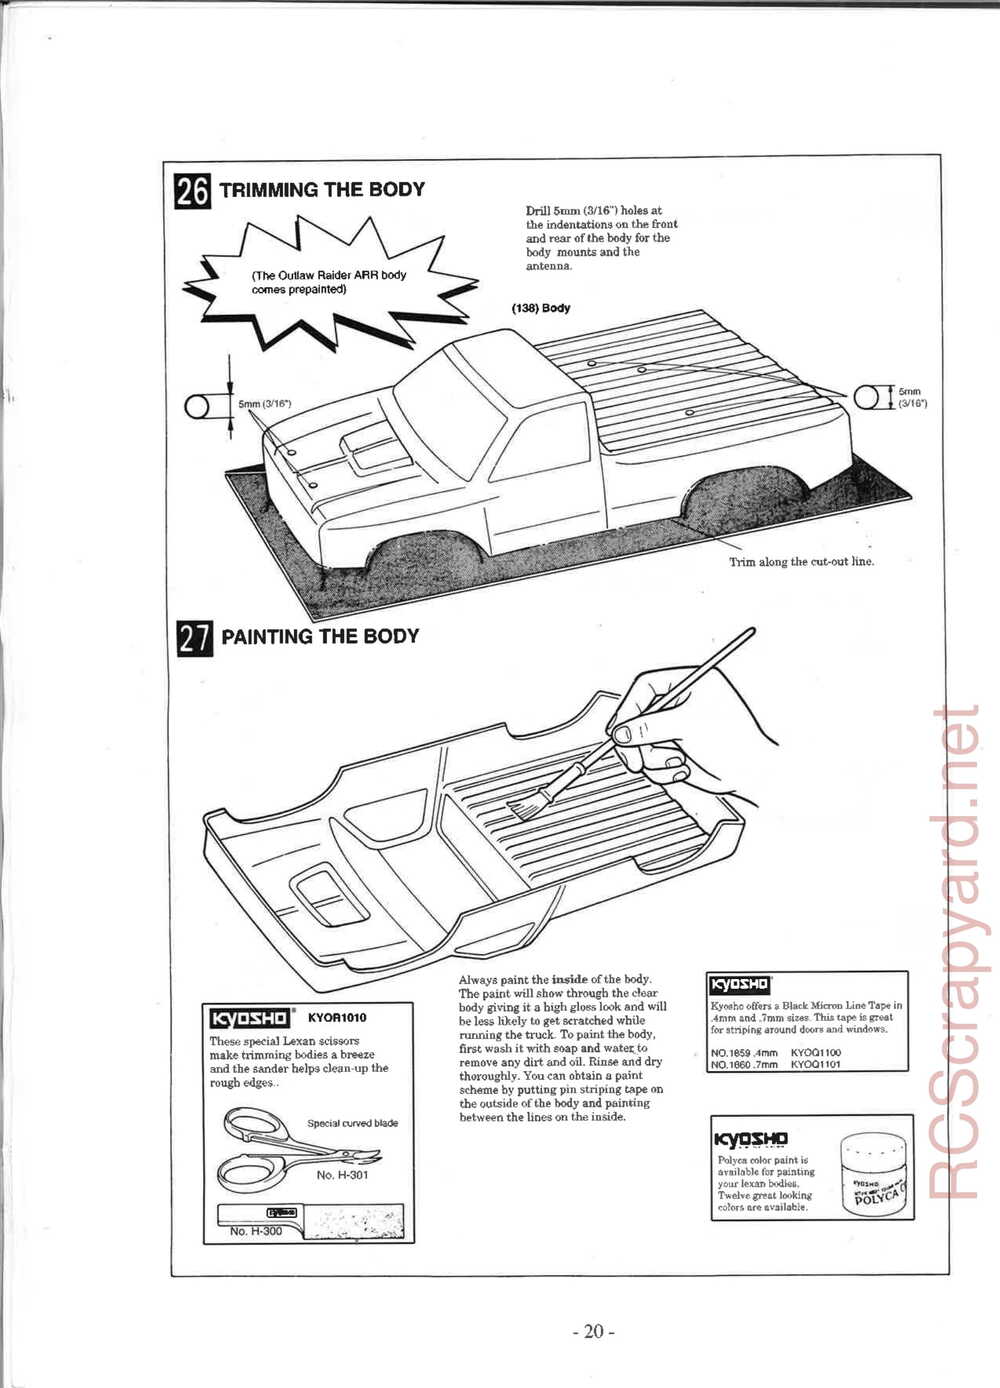 Kyosho - 3162H - Outlaw-Raider ARR - Manual - Page 20